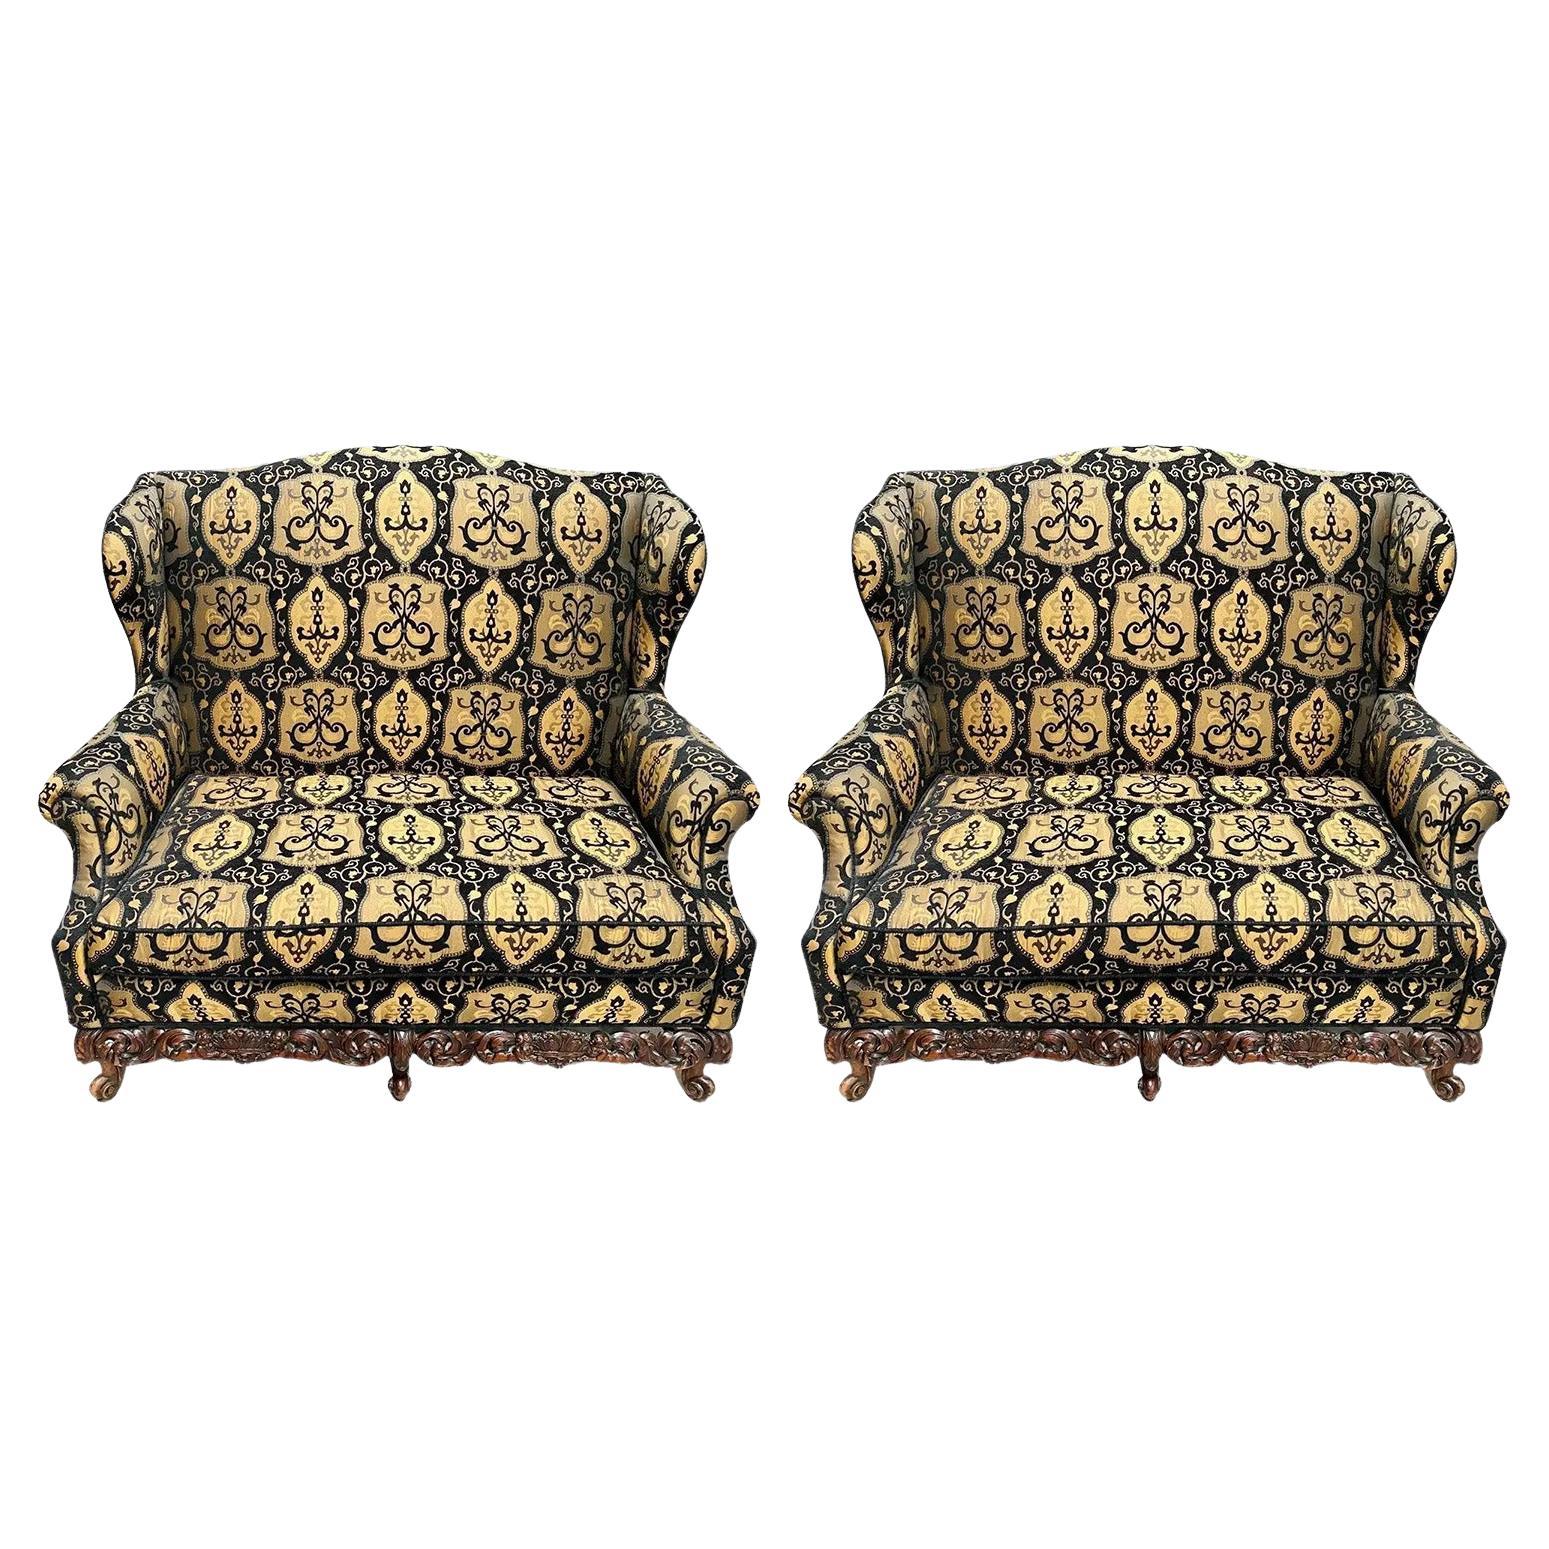 Italian Rococo Revival Style Settee or Sofa, Black and Beige Upholstery, a Pair For Sale